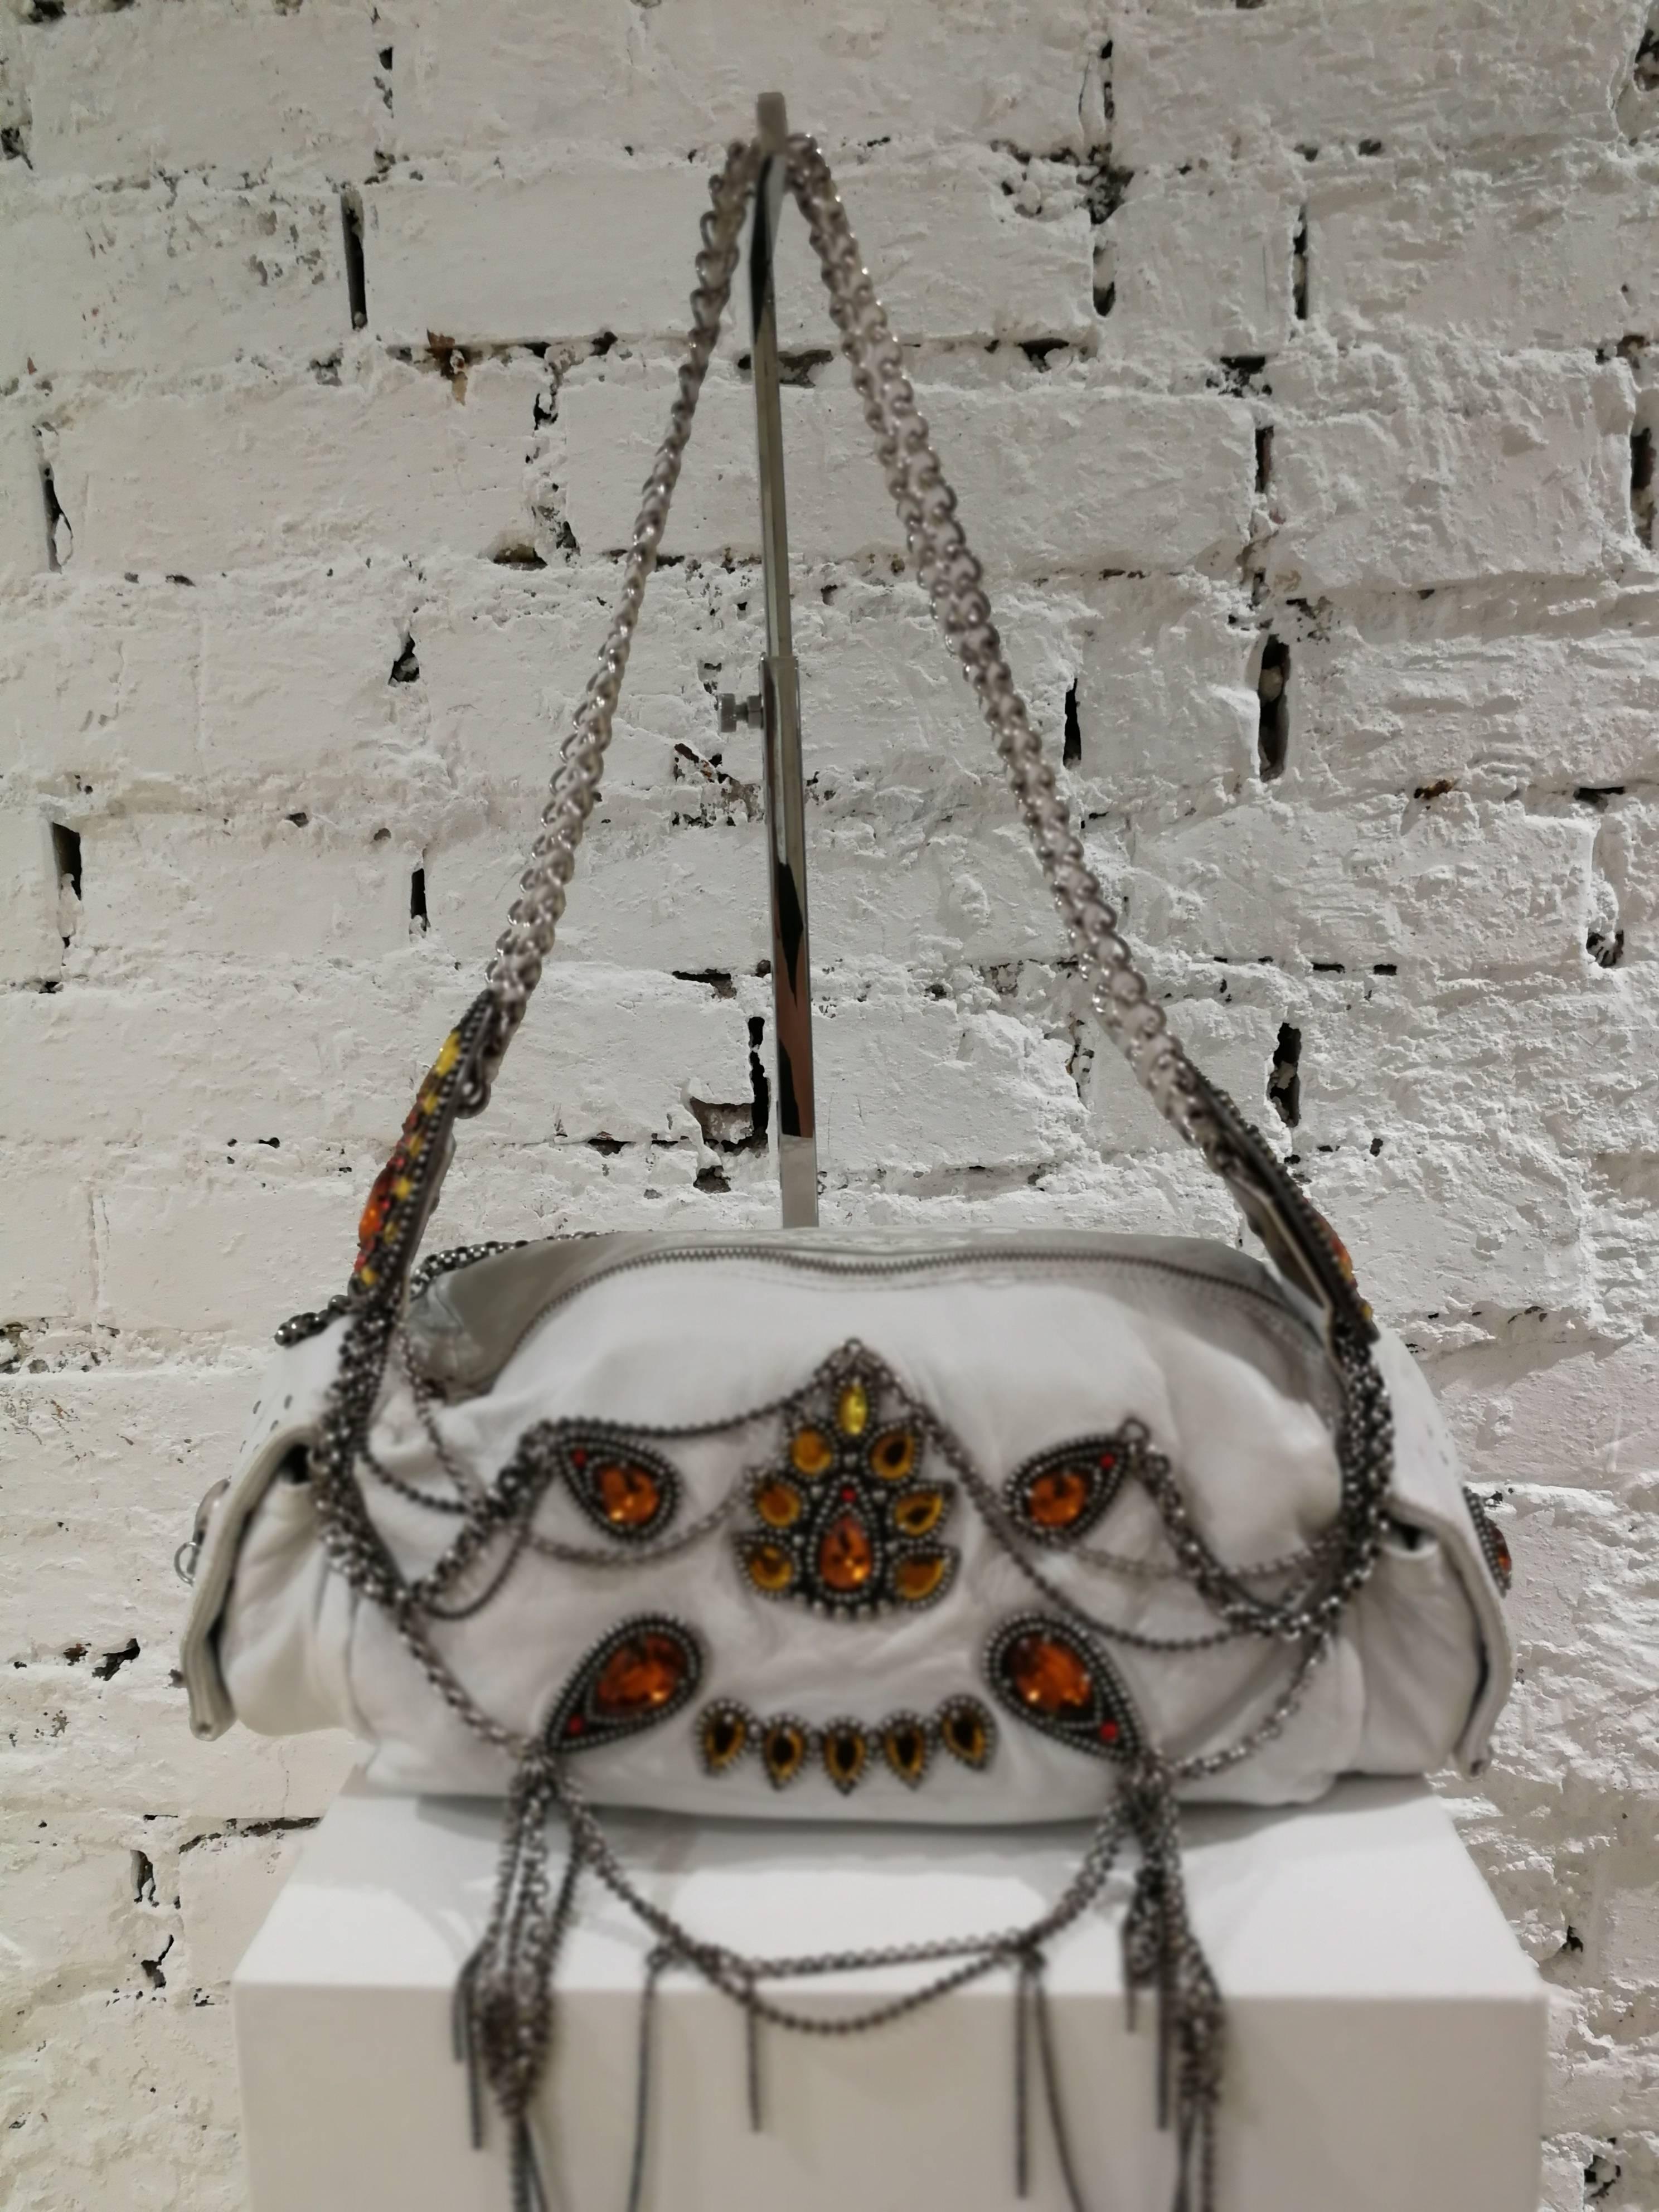 John Richmond white leather chains and swarovsky Shoulder Bag

Richmond white leather bag with silver tone hardware all over on both sides silver tone skulls

Silver tone chain are allover embellished with orange real swarovsky

Totally made in